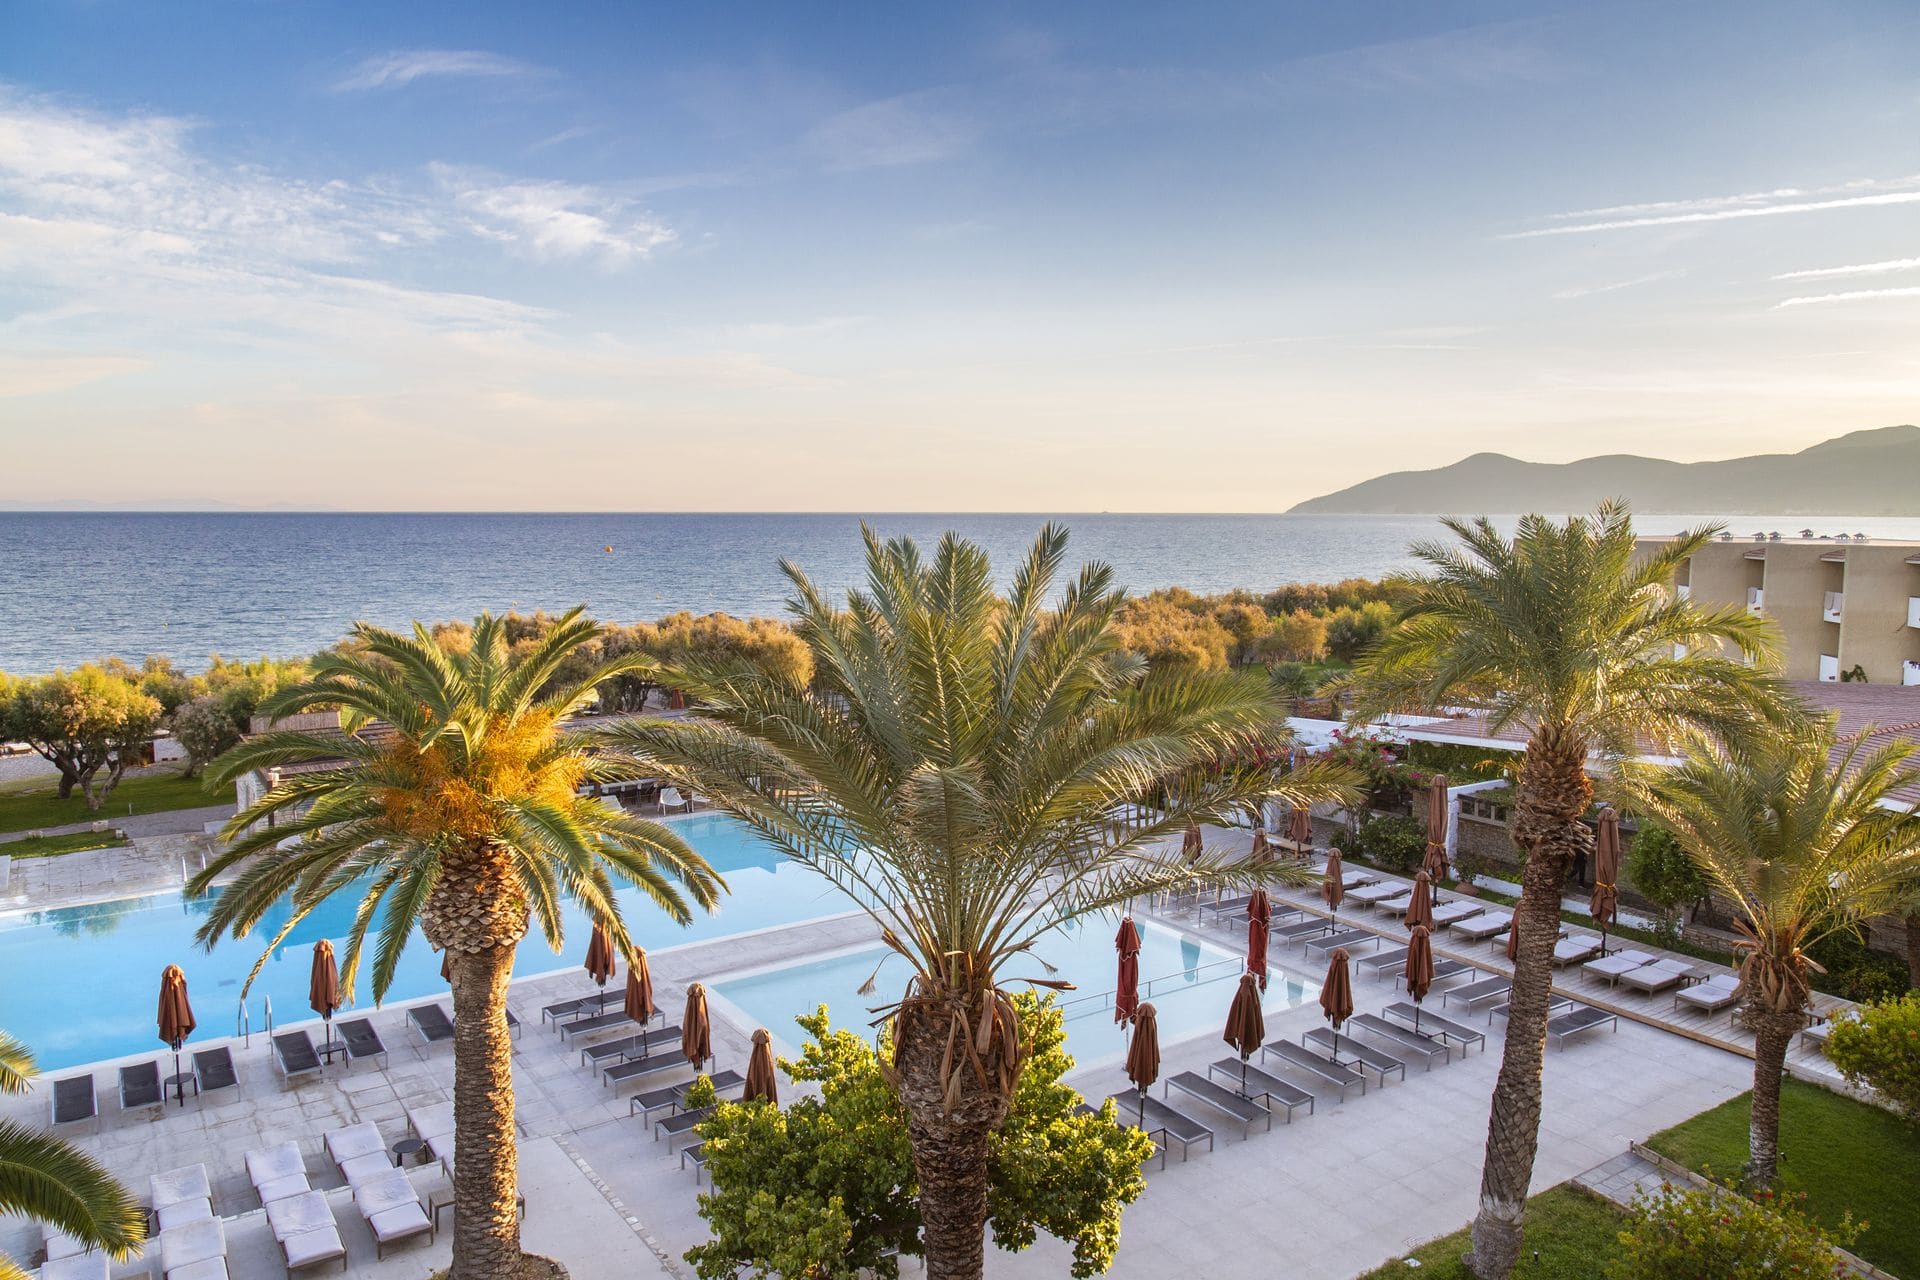 Collection of Doryssa luxury hotels in Samos main pools surrounded by palm trees